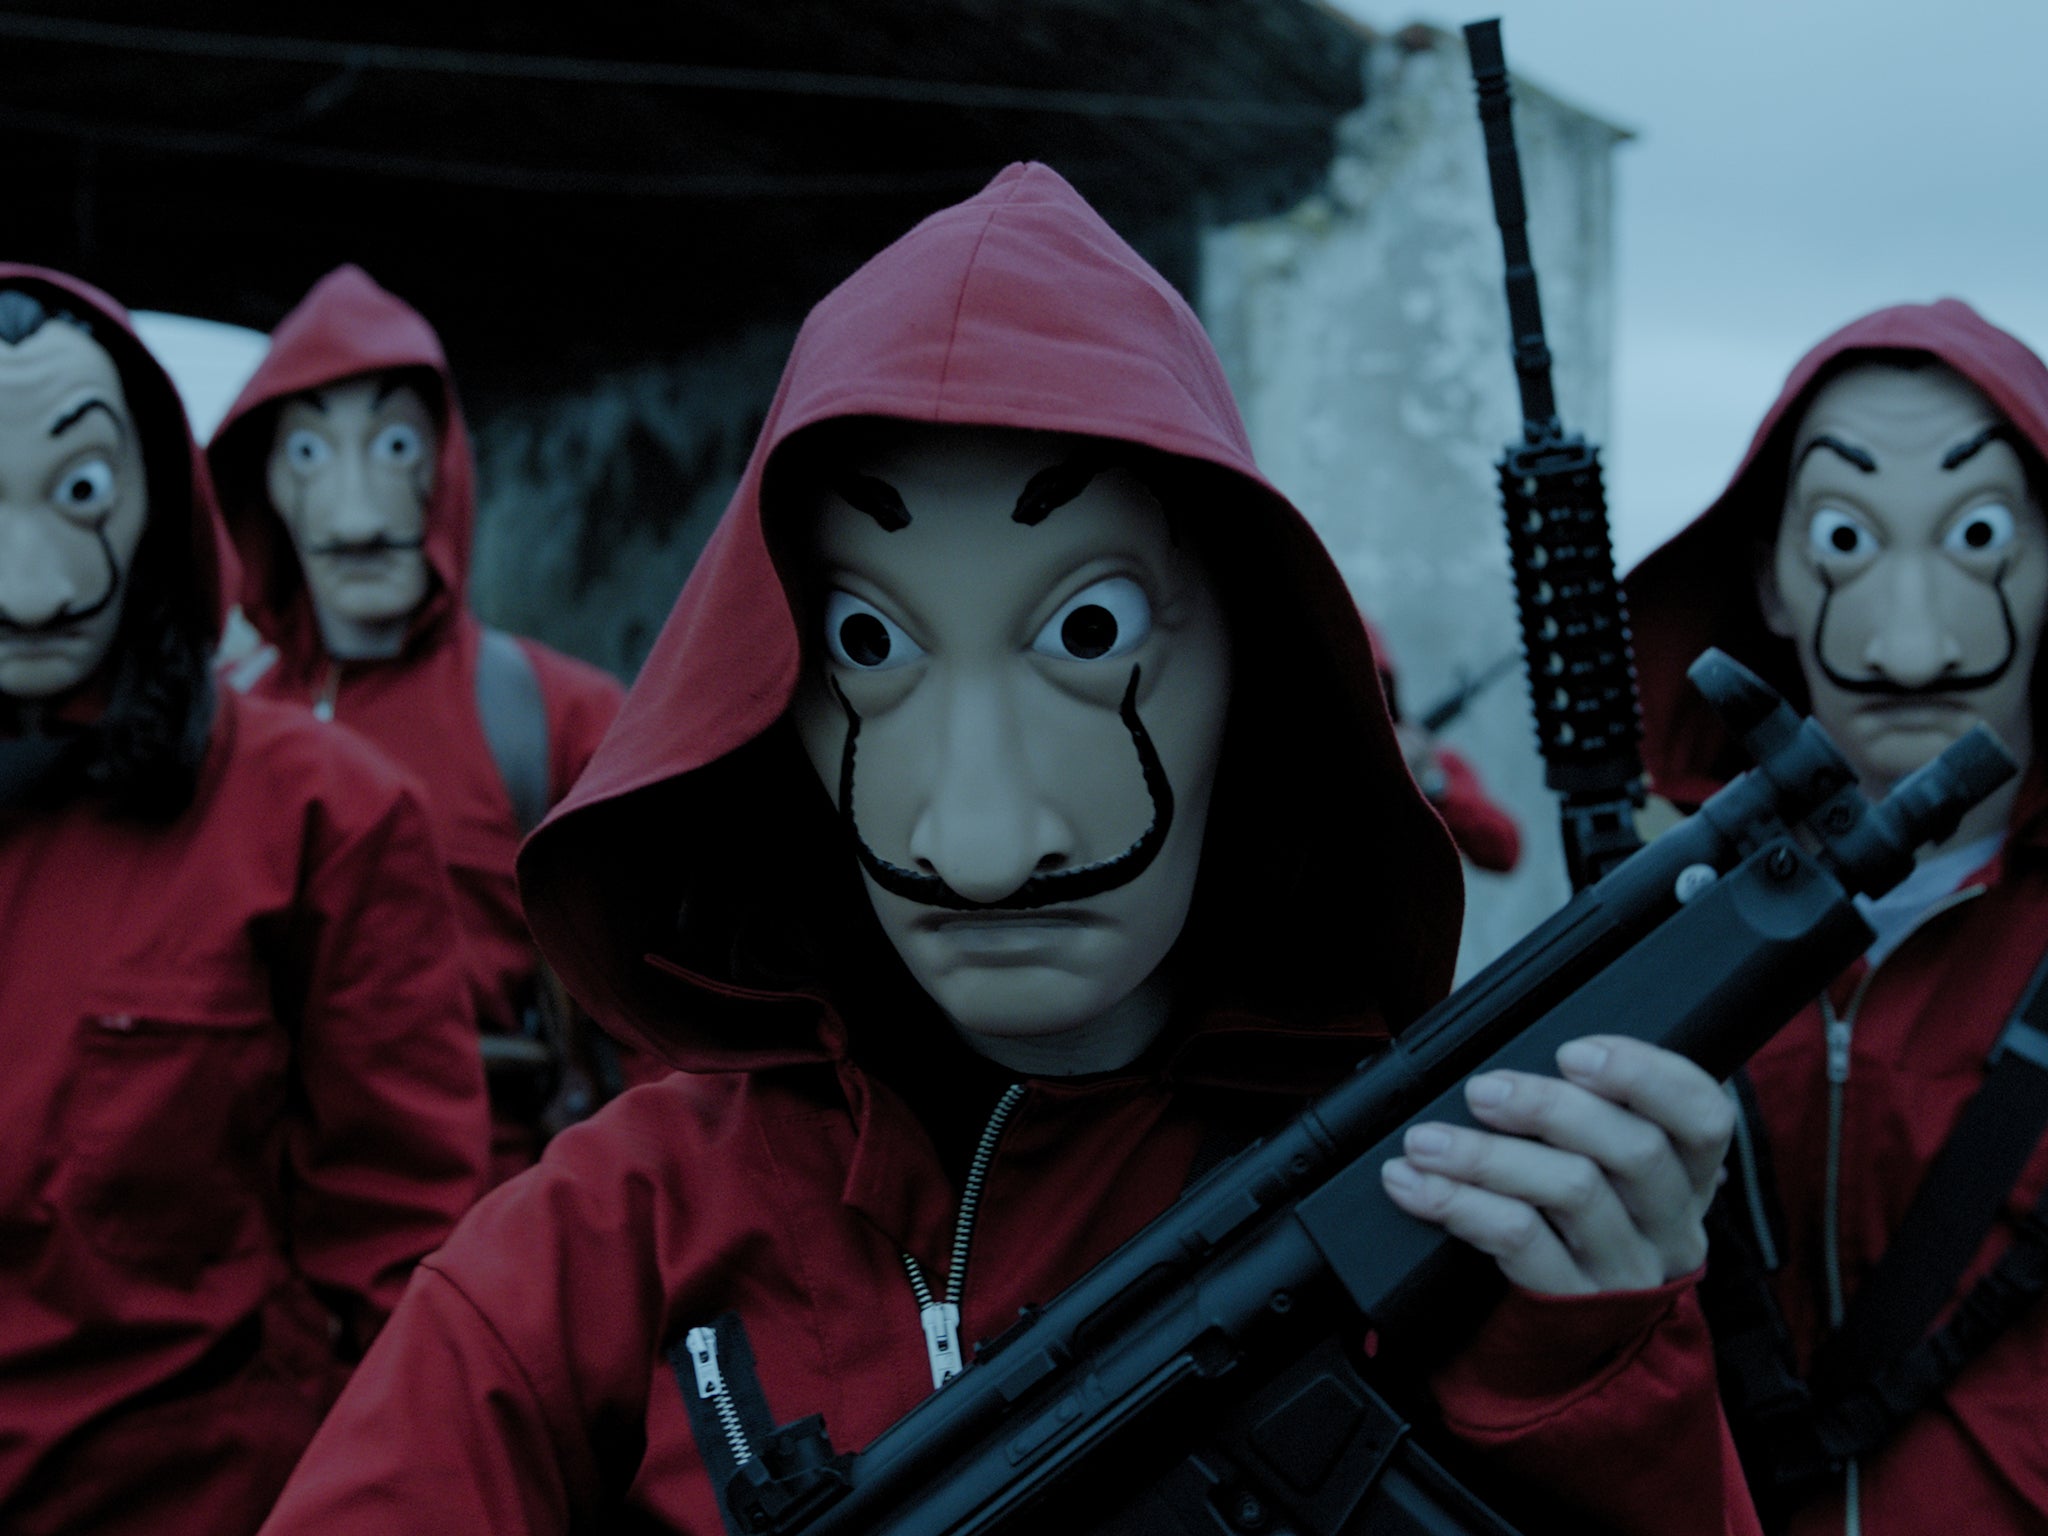 The Dalí masks and red boilersuits of ‘Money Heist’ have become a symbol of resistance beyond the series, having been used in political protests in Puerto Rico&nbsp;